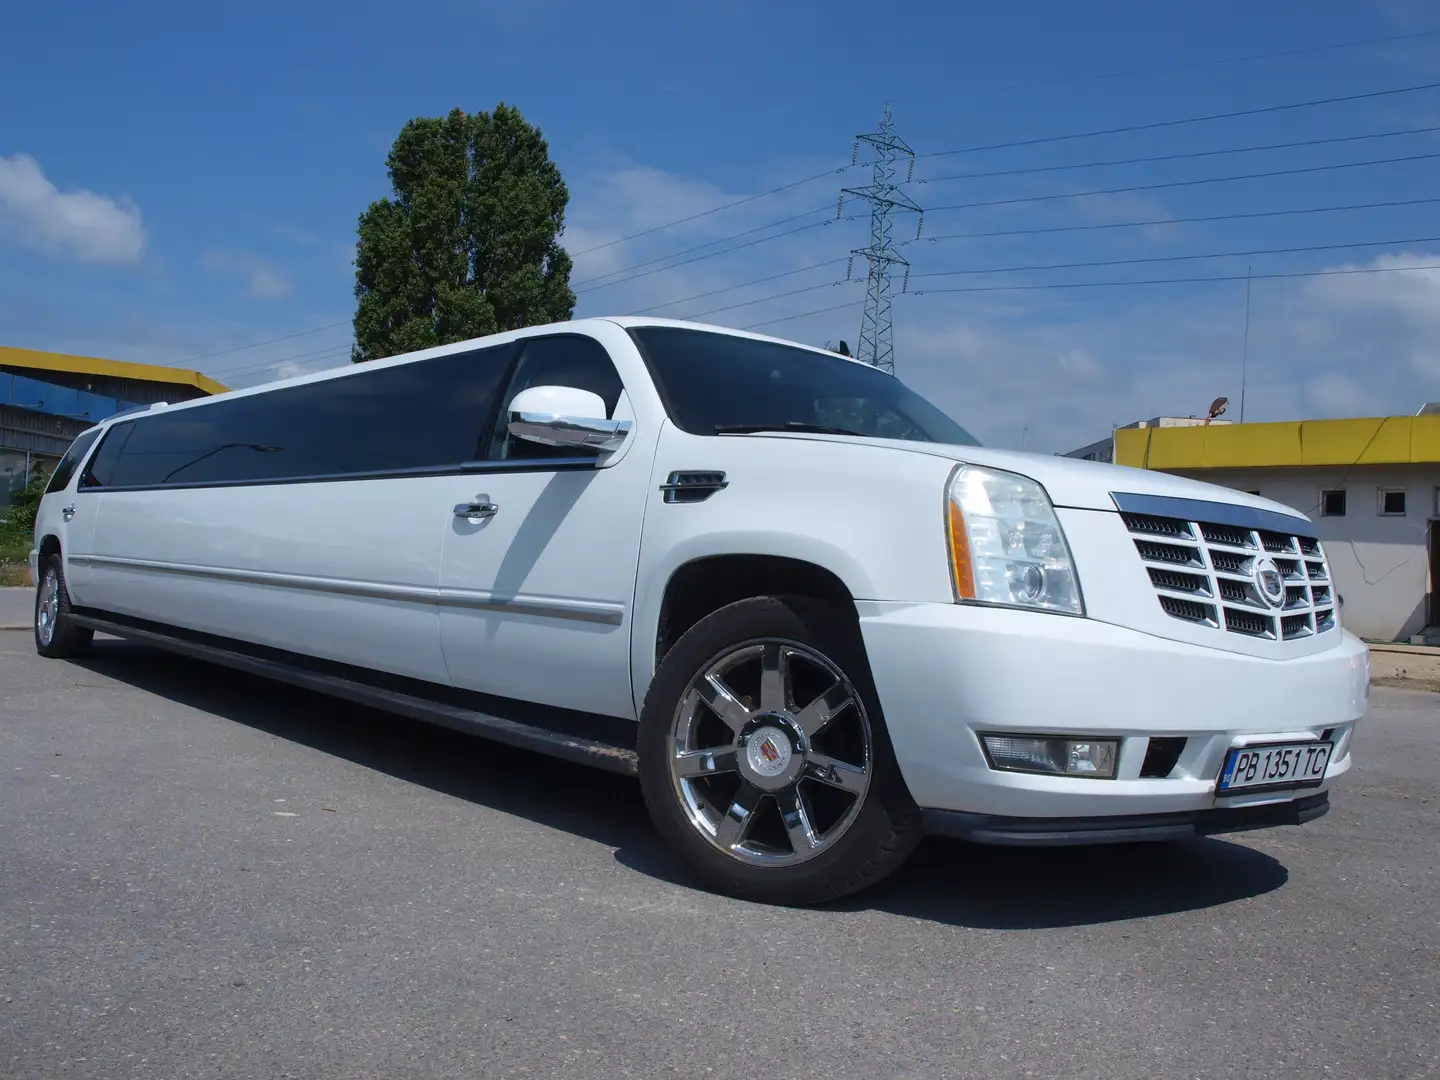 Cadillac Escalade 203-inch Stretch Limousine by Moonlight Industries Blanco - 1